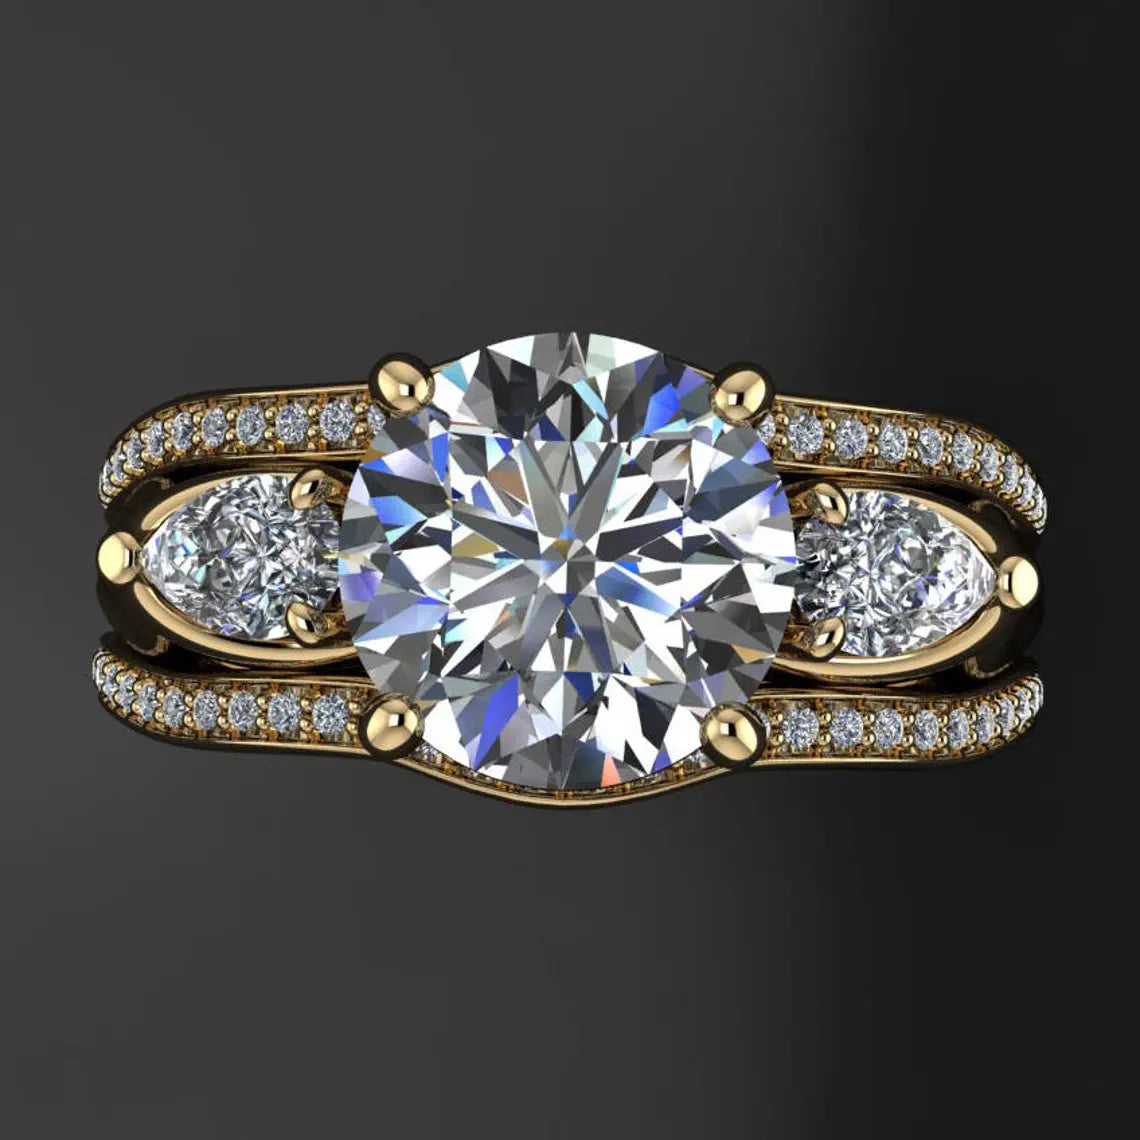 annabelle ring – 2 carat round NEO moissanite engagement ring, 3 stone ring - J Hollywood Designs